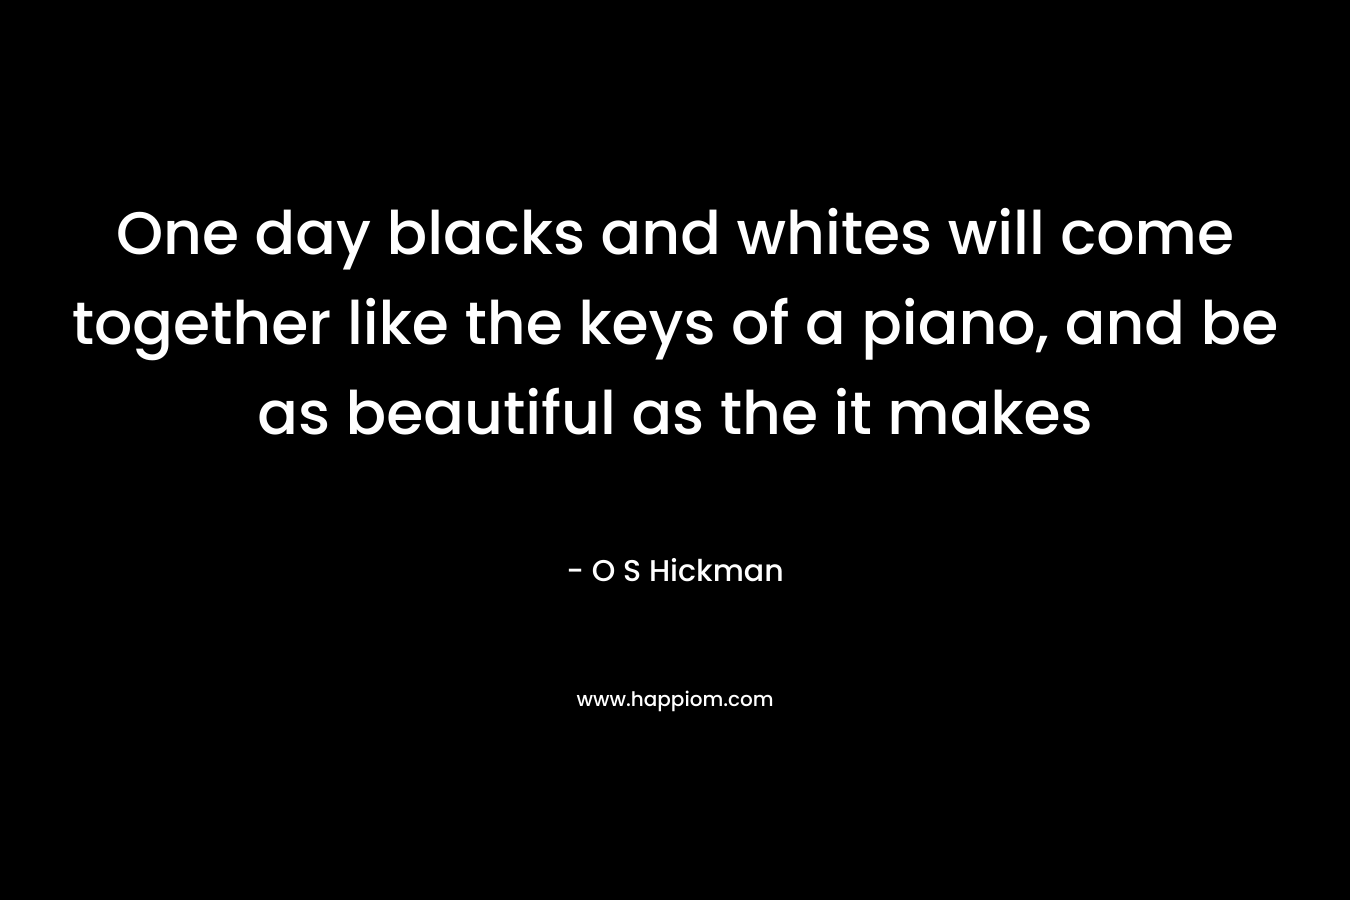 One day blacks and whites will come together like the keys of a piano, and be as beautiful as the it makes